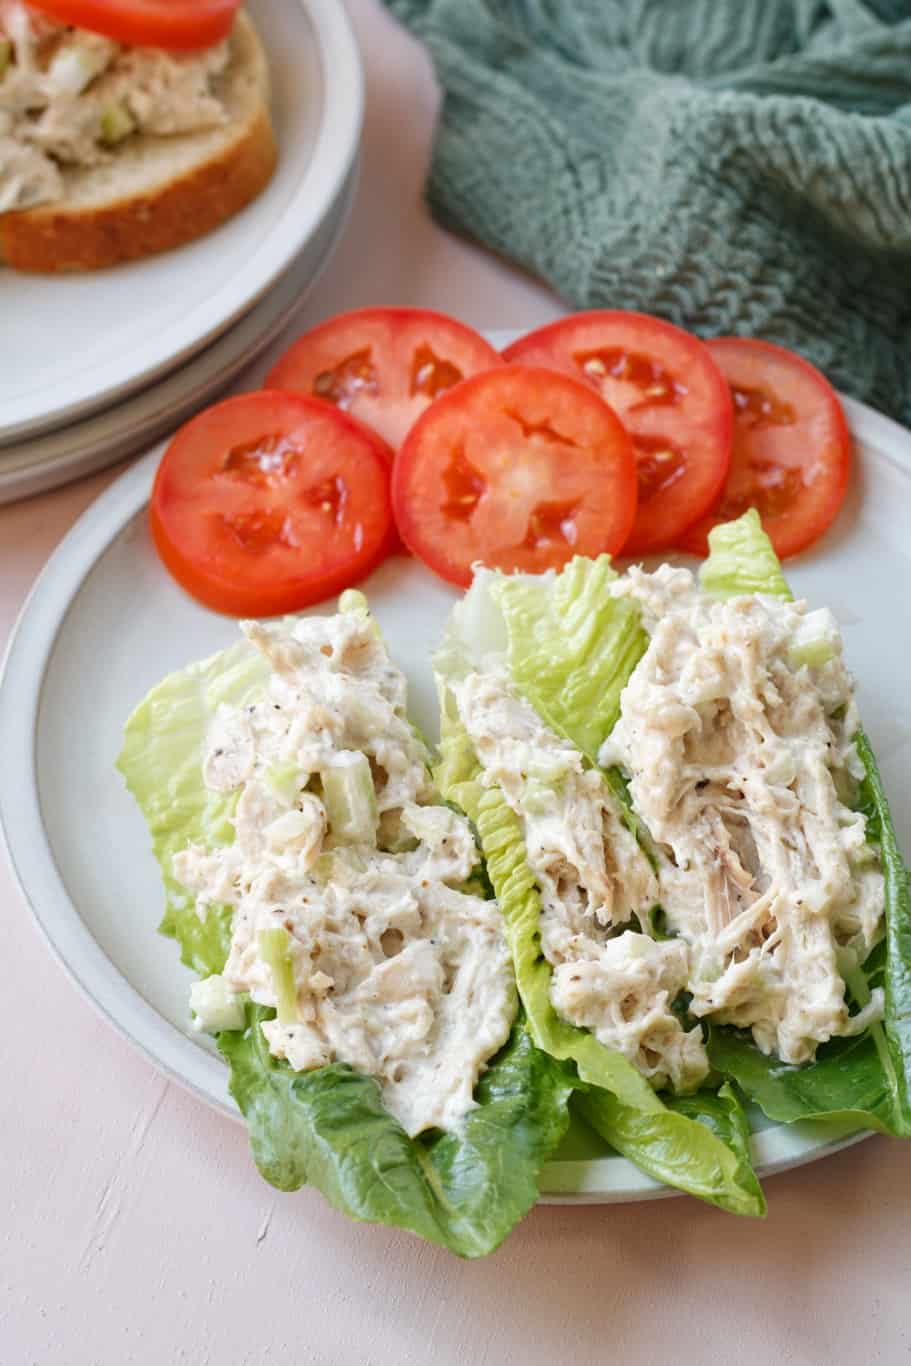 creamy zoe's chicken salad made up of shredded cooked chicken, chopped celery, mayo, salt, and black pepper served on a bed of fresh lettuce alongside tomatoes